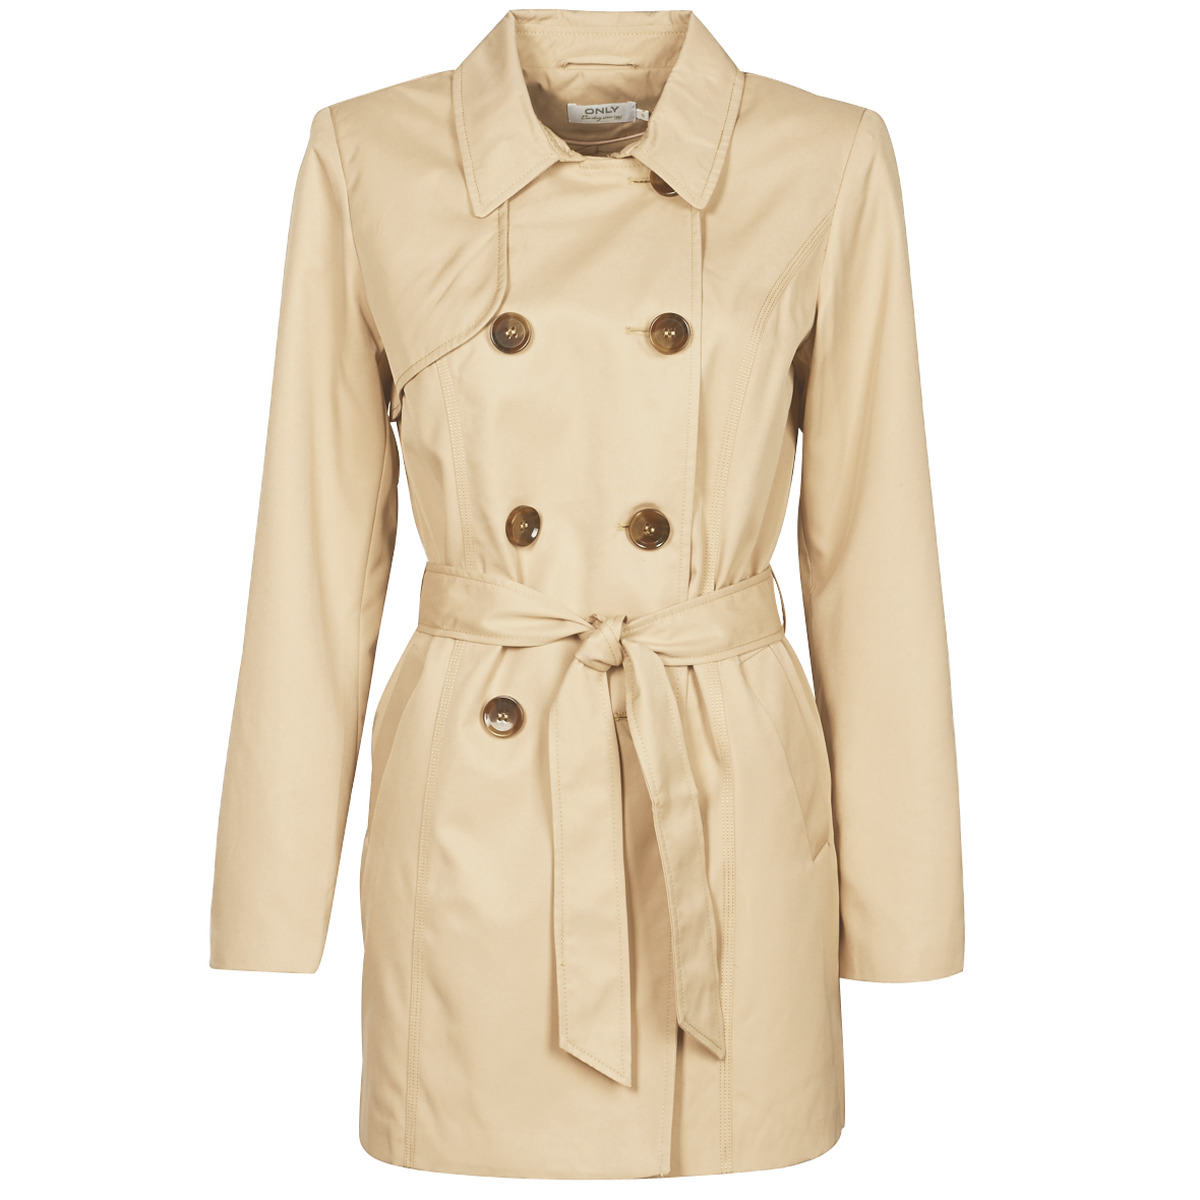 Spartoo ! Clothing coats Europe Trench - Women Fast Only 55,00 delivery | € Beige ONLVALERIE -